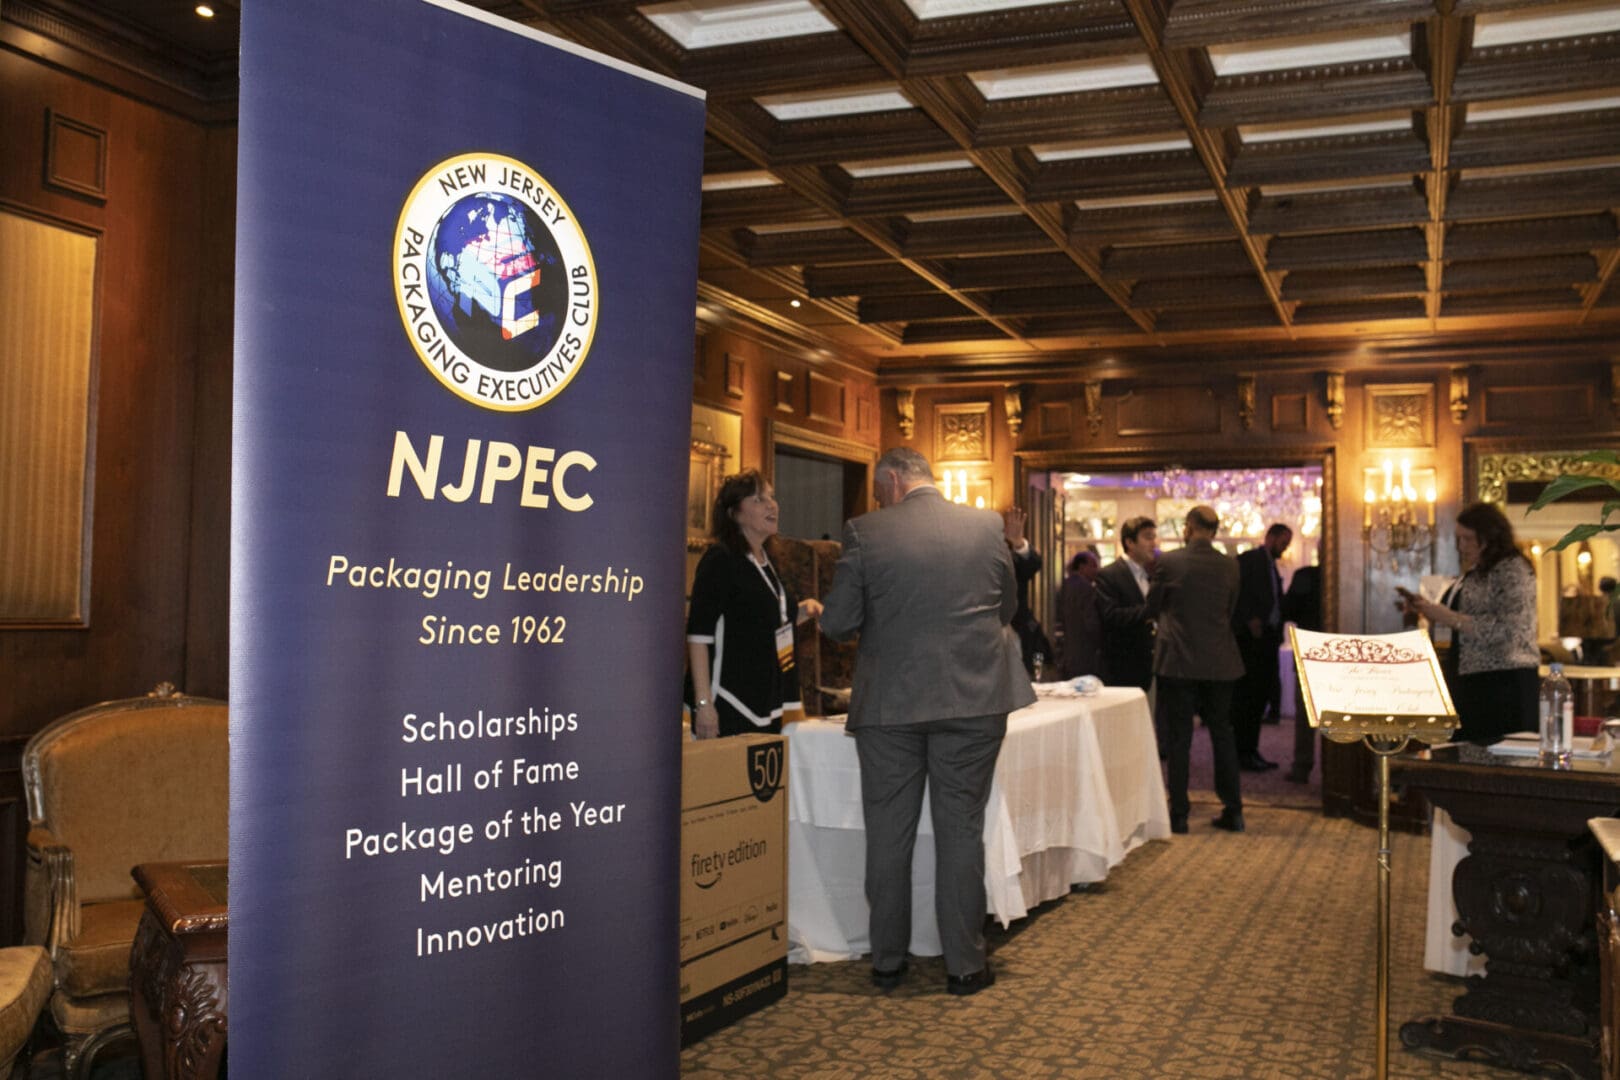 A group of people standing in a room with a banner that says nfpc.